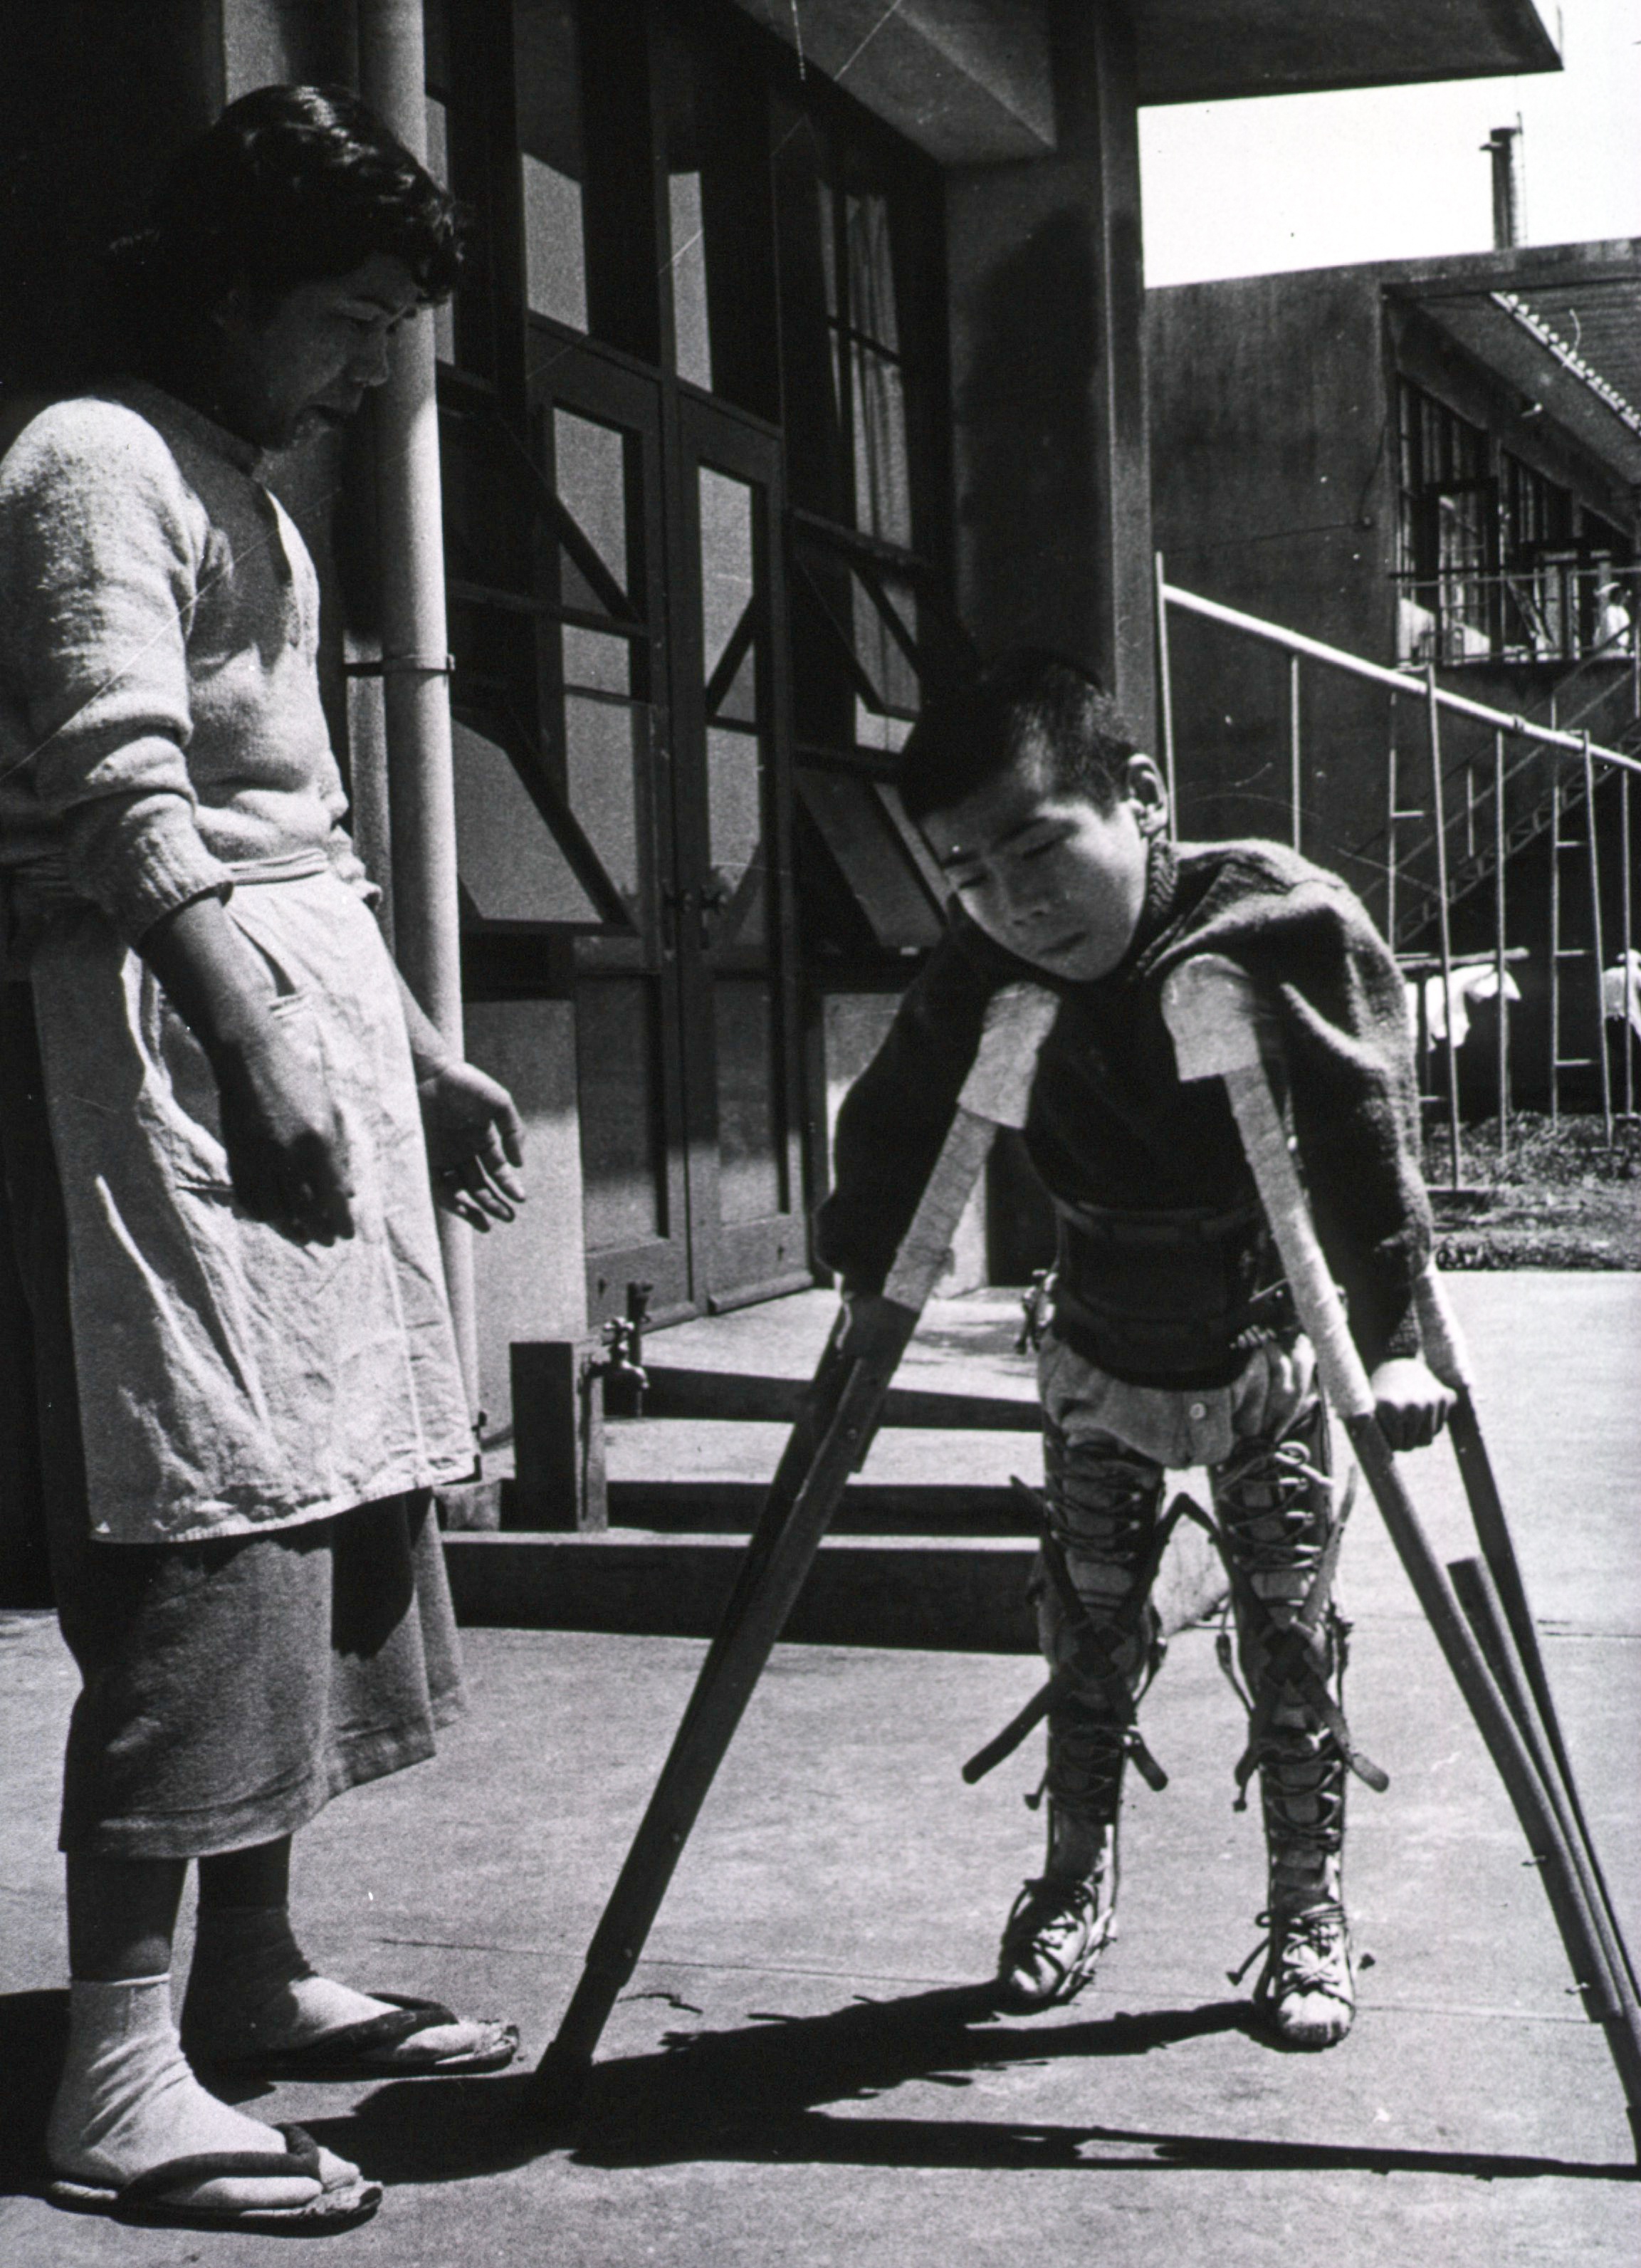 A black and white photo of a child on crutches trying to walk with a nurse nearby. Photo taken in Japan at a polio hospital